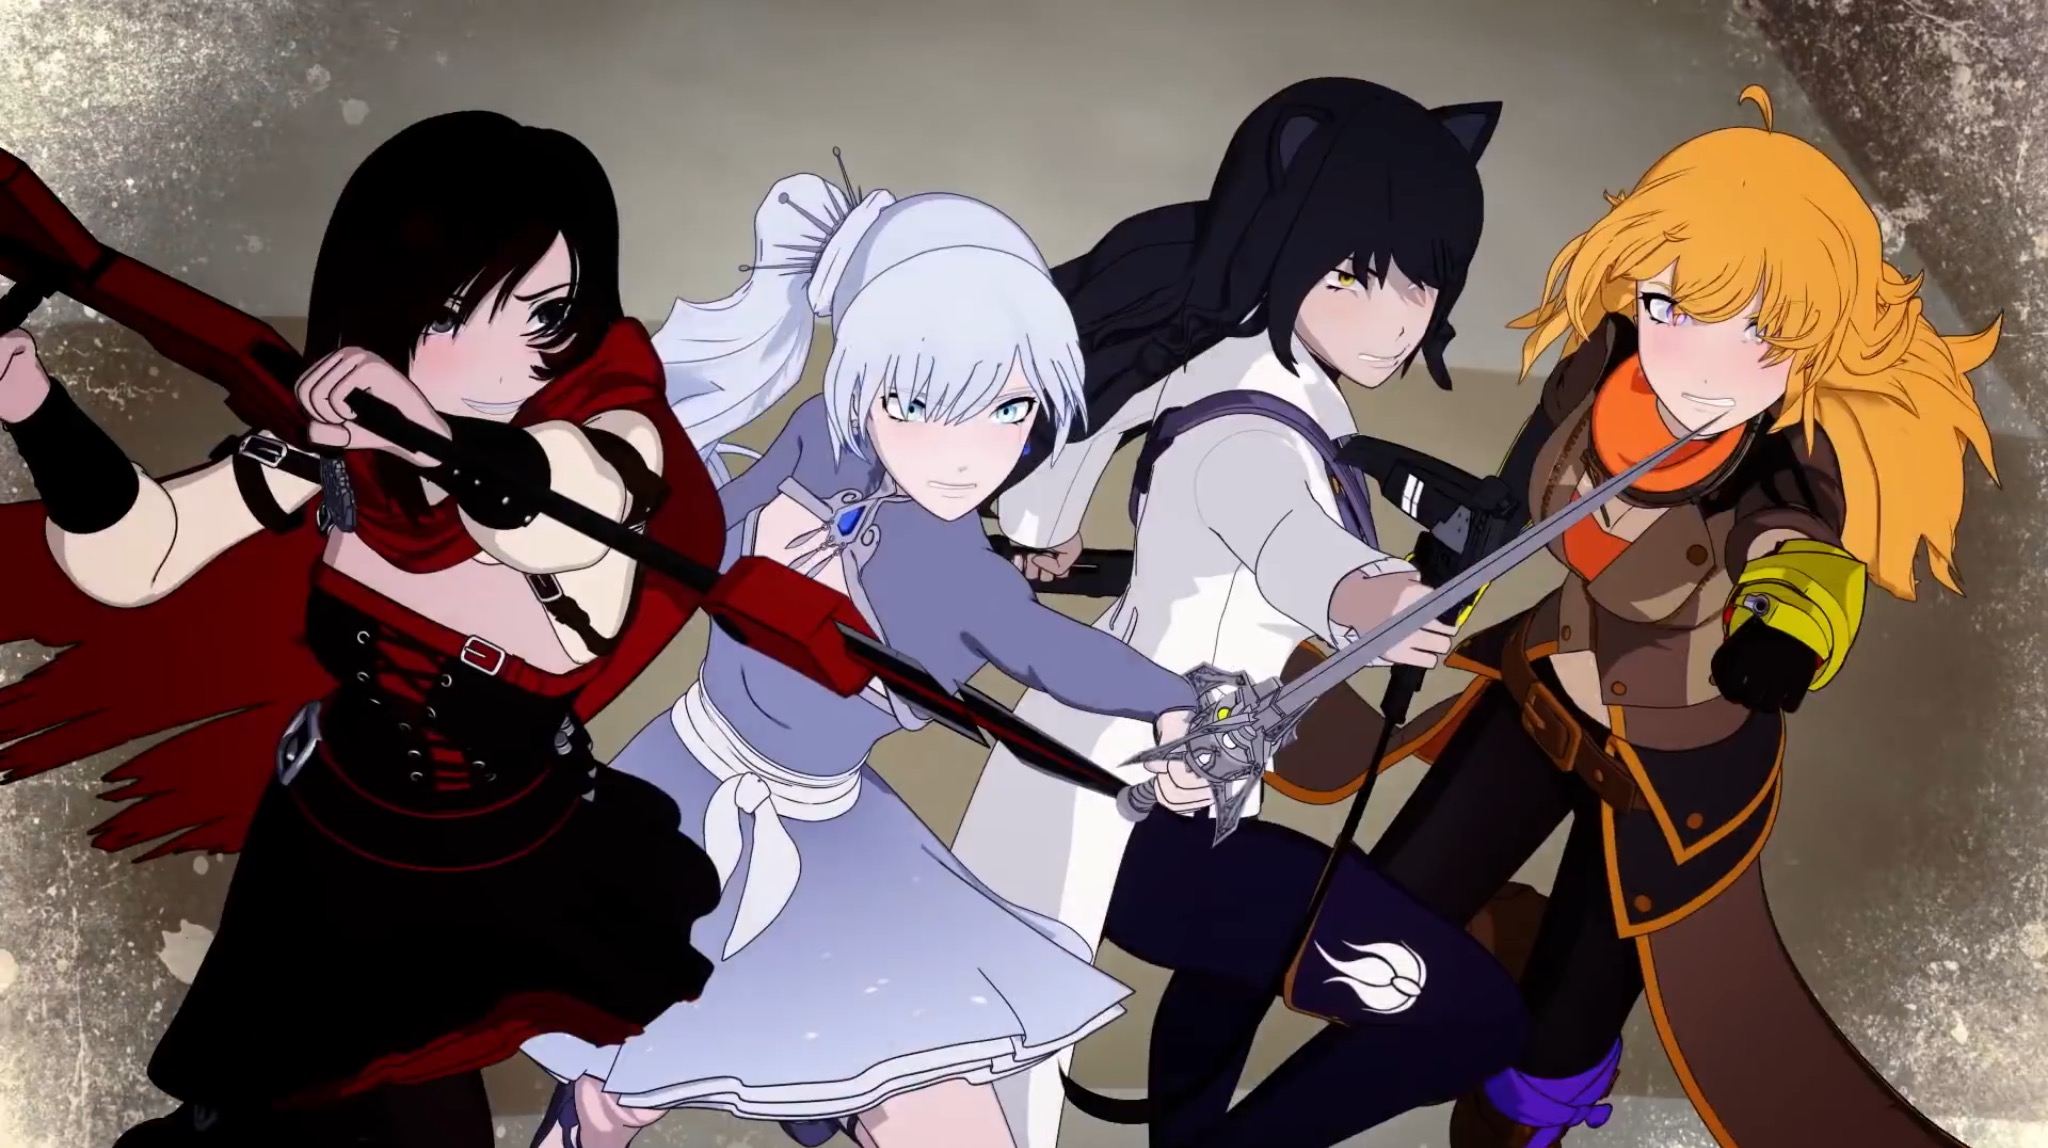 The four main characters of RWBY run toward battle: Ruby, Weiss, Blake, and Yang.